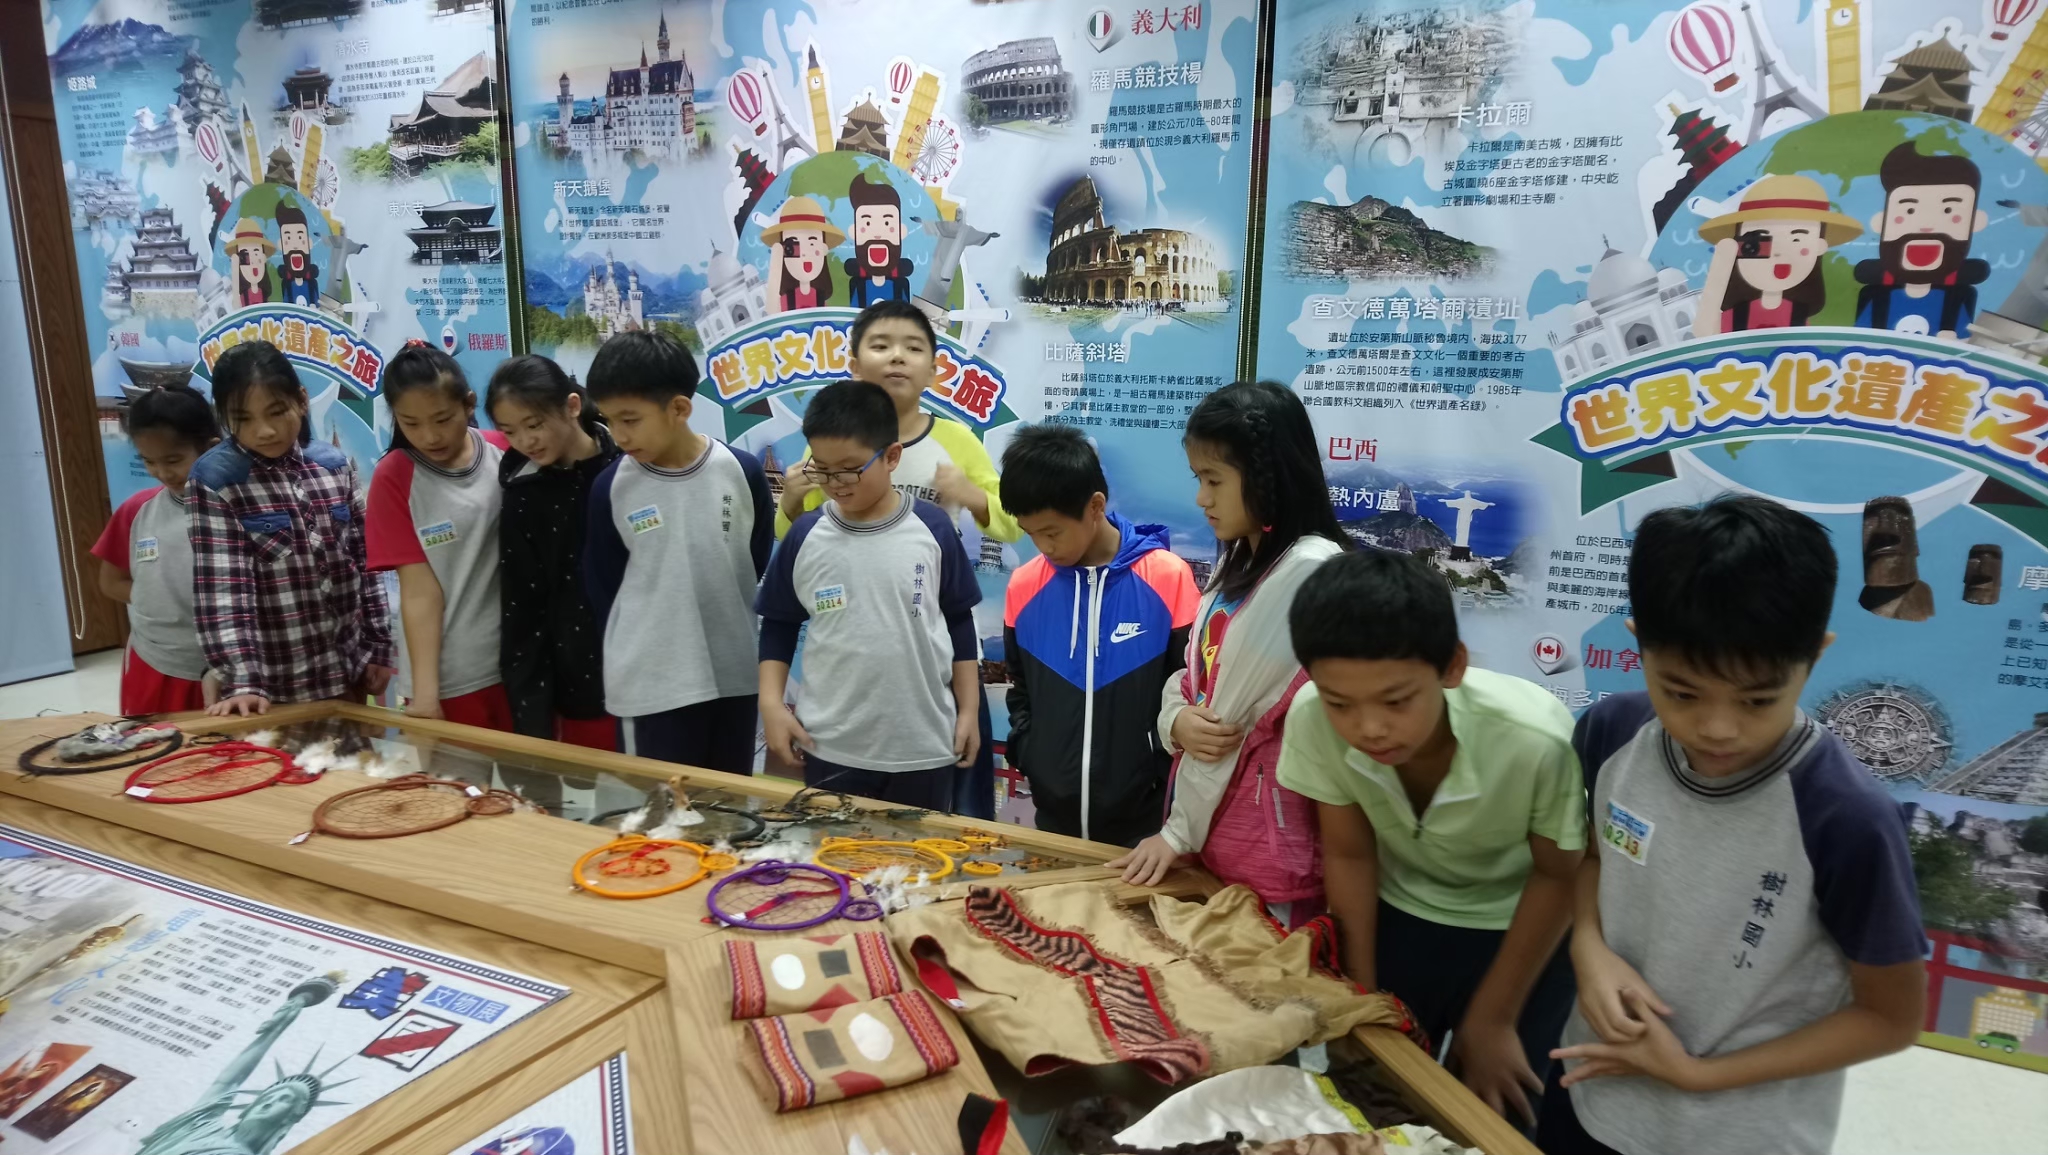 Education Bureau of New Taipei City cultivates cross-cultural talents. (Photo / Provided by the Education Bureau of New Taipei City)